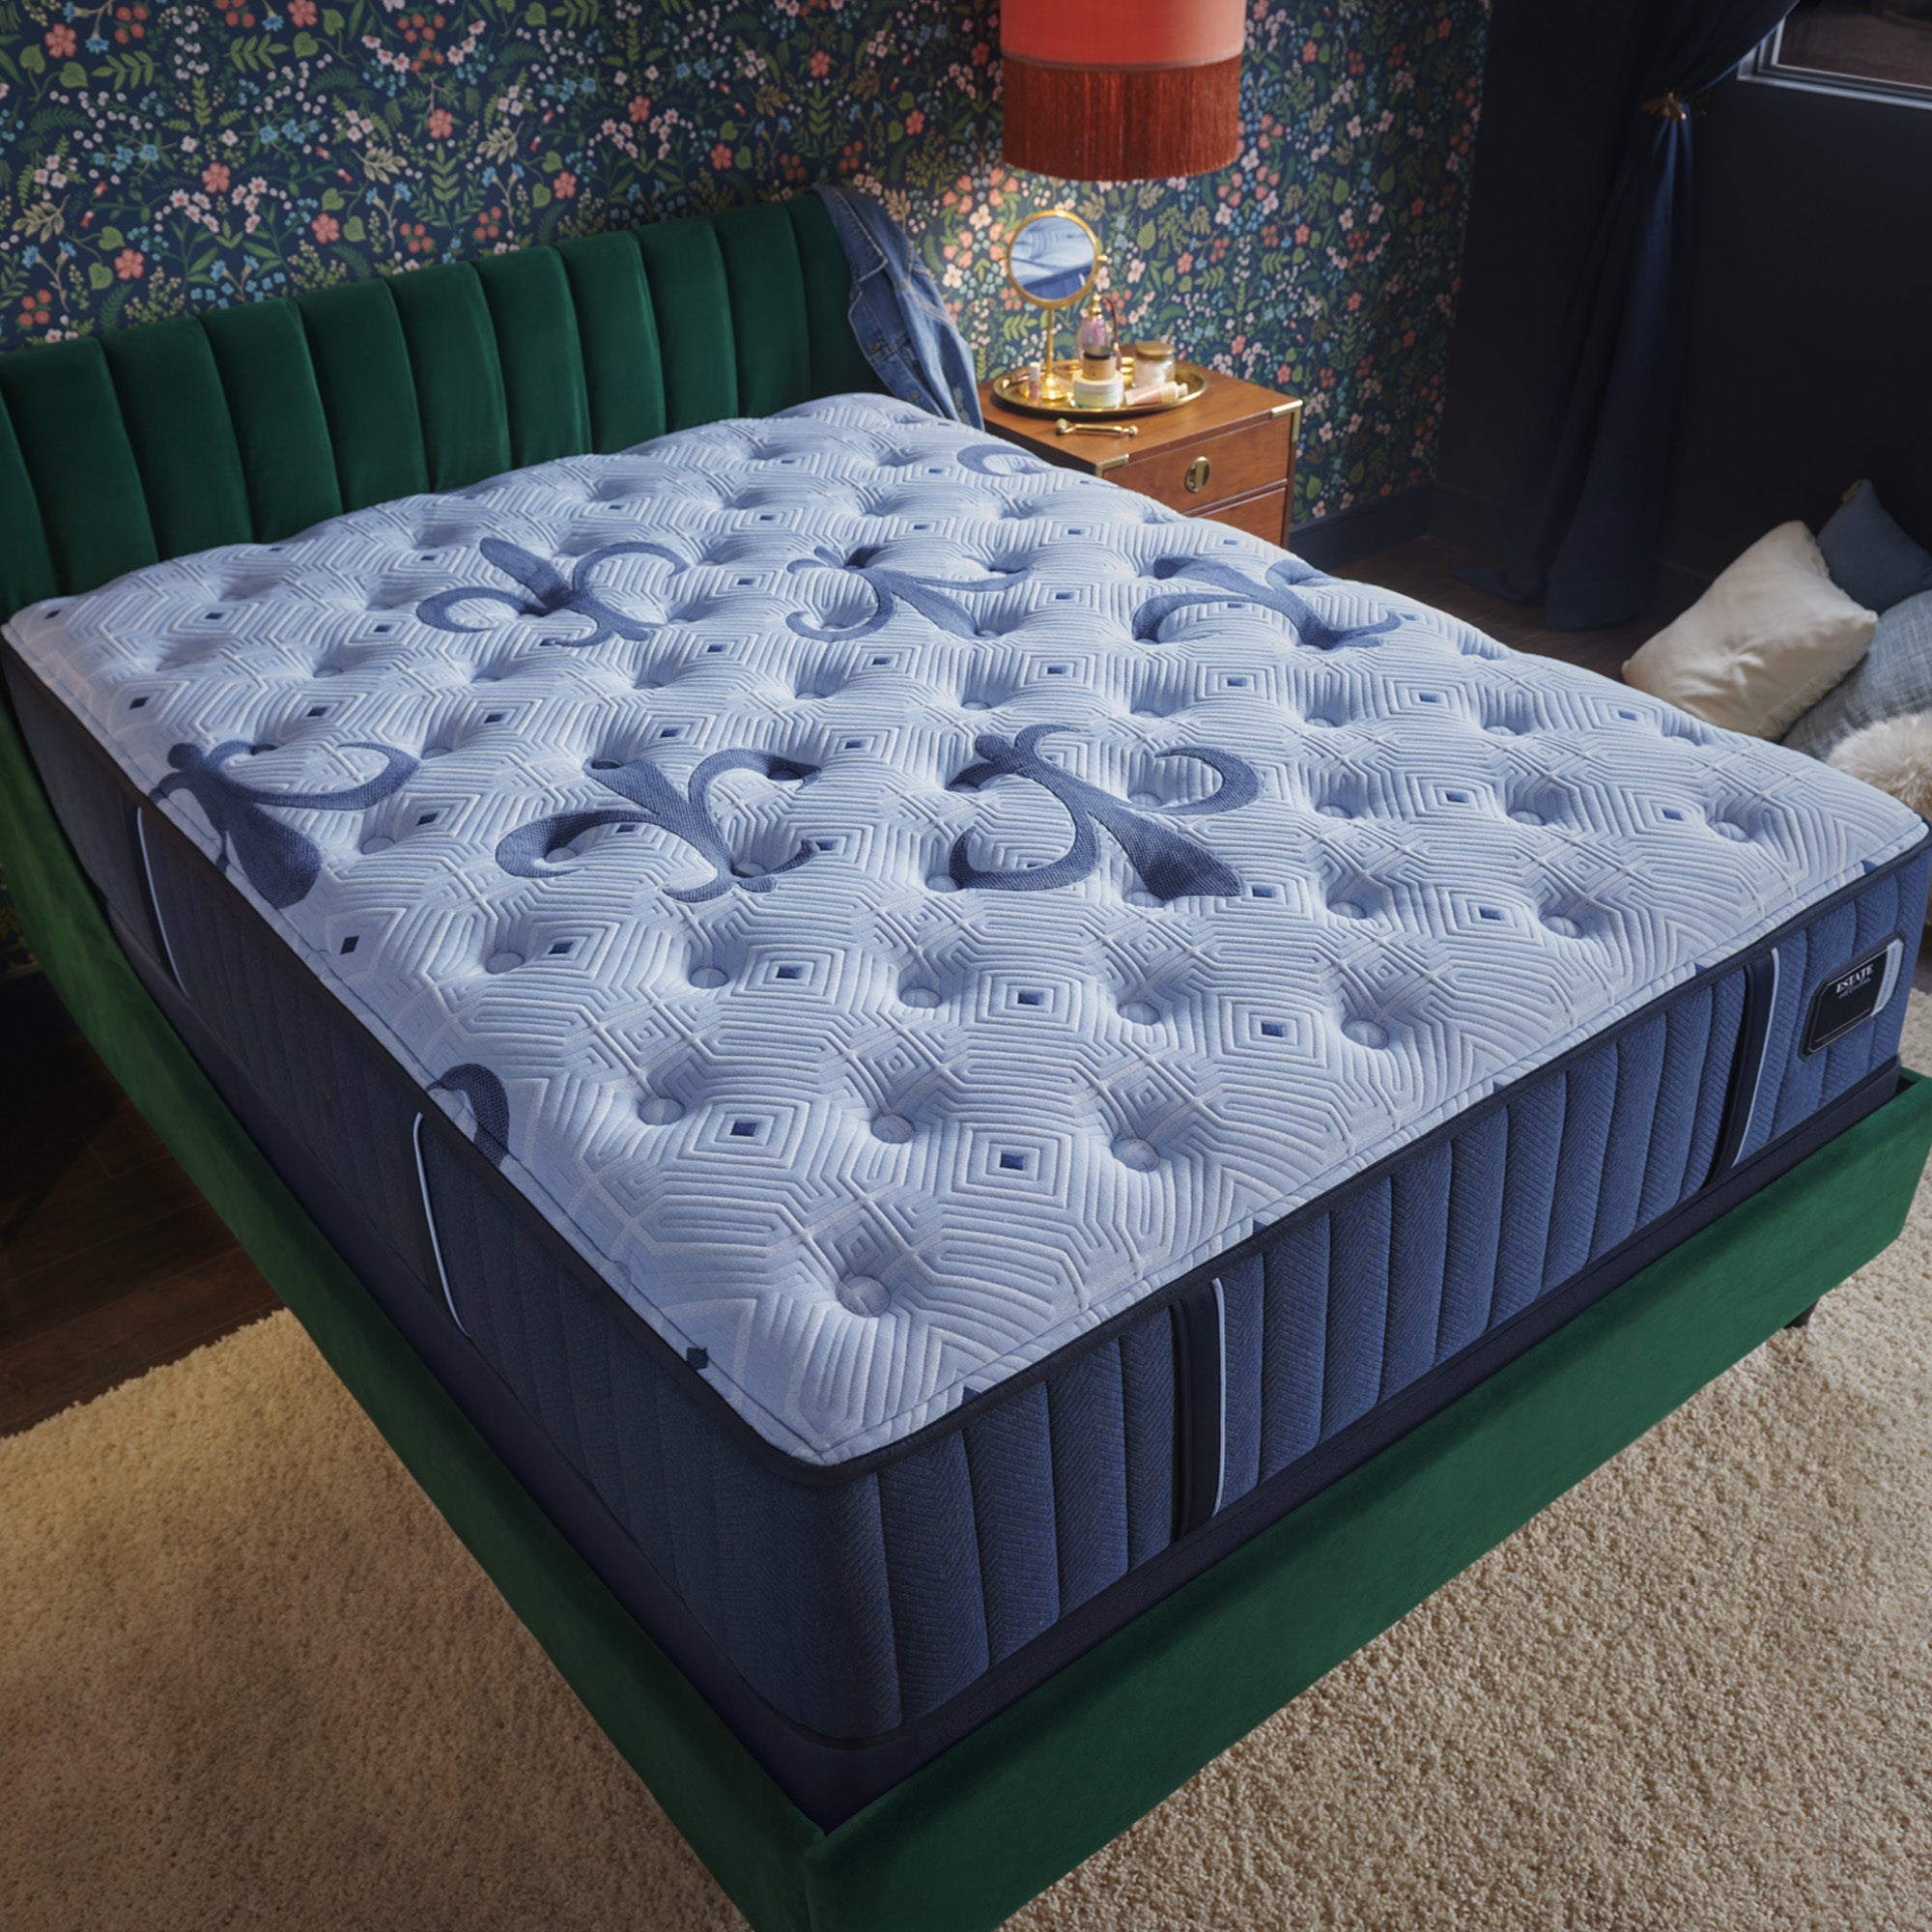 Picture of Stearns & Foster Estate Soft Mattress